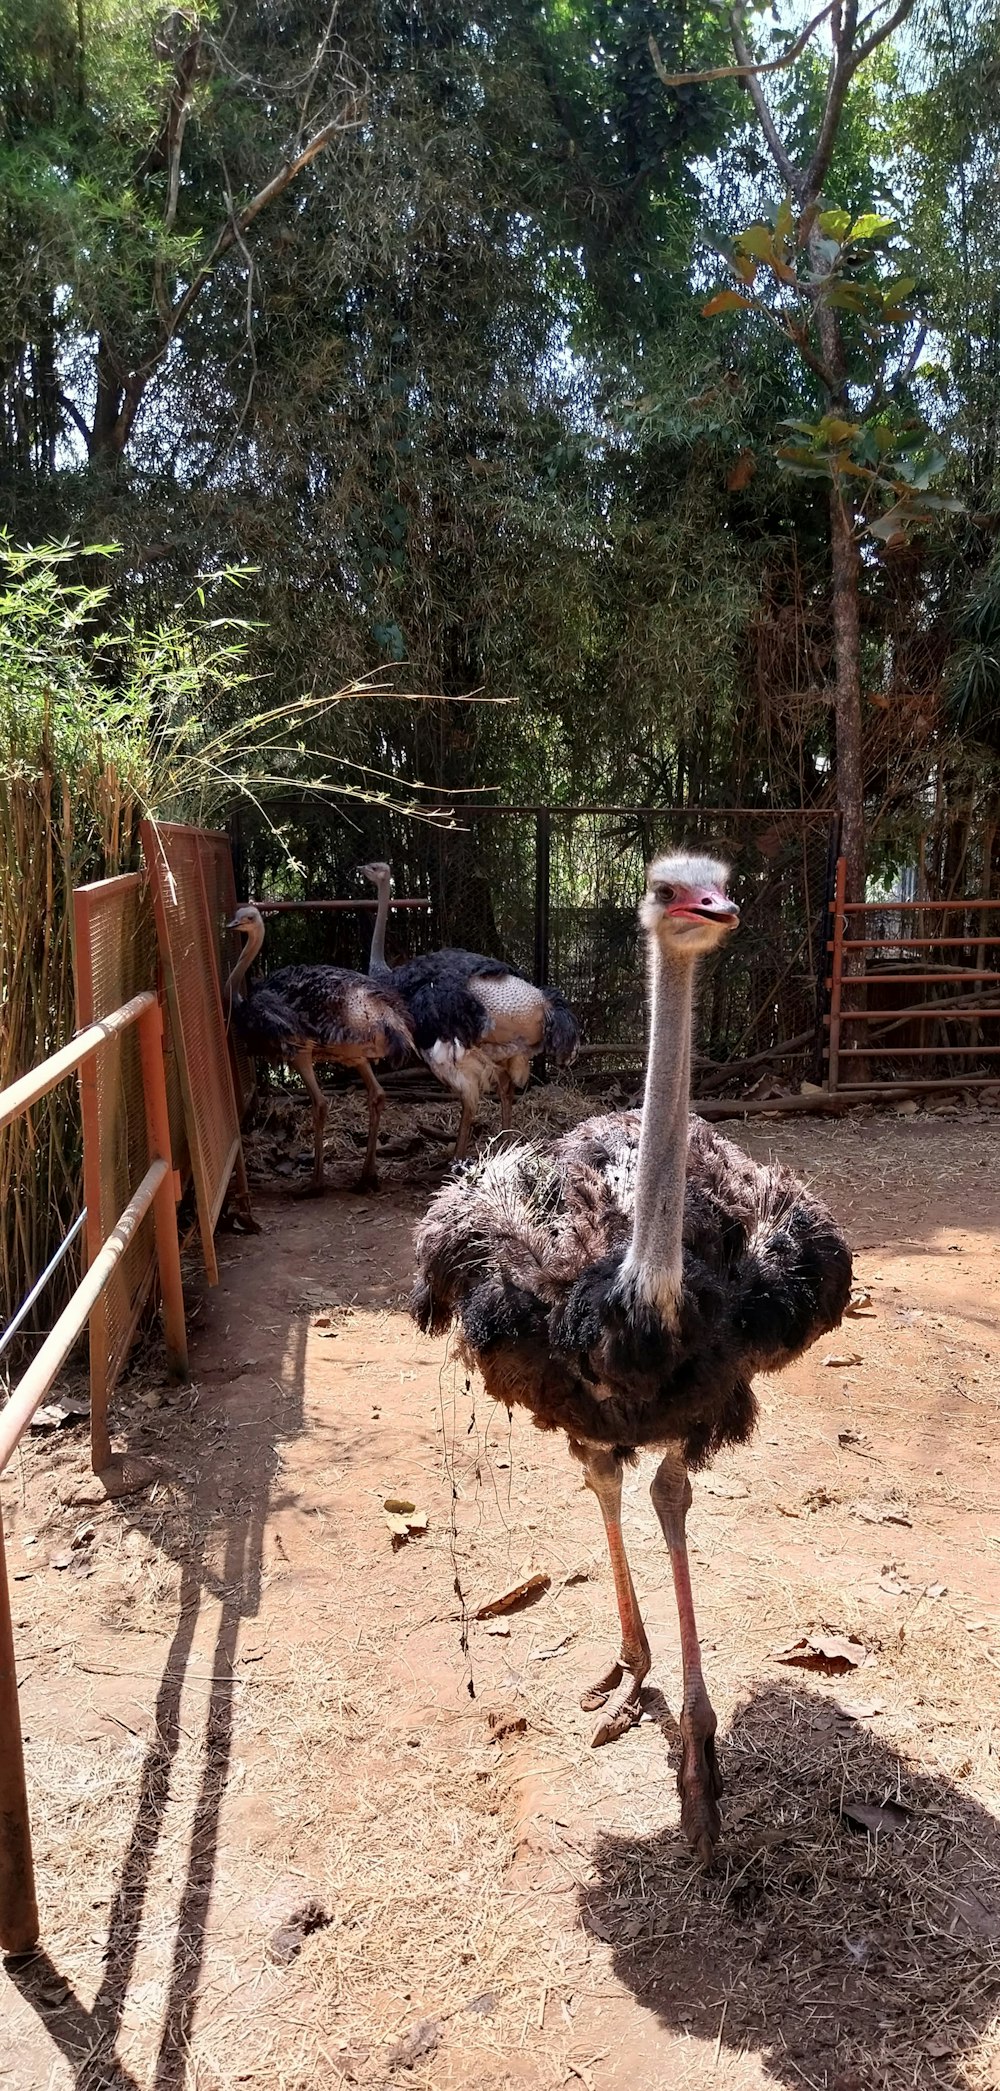 an ostrich standing in the dirt near a fence